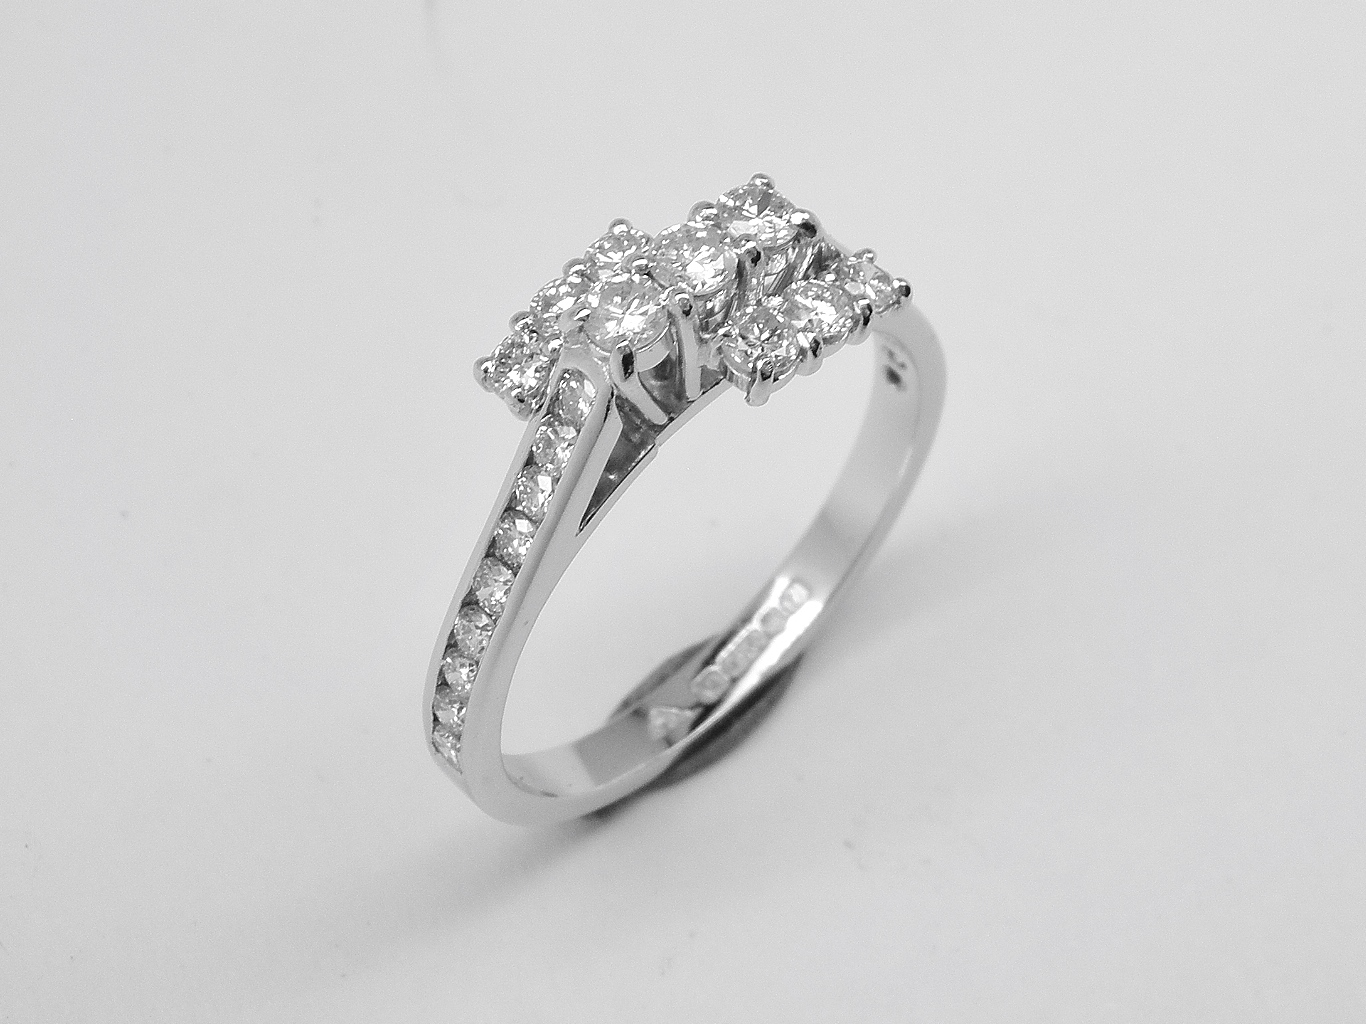 A 9 stone round brilliant cut diamond ring mounted in platinum and channel set with 9 round brilliant cut diamond down each shoulder.